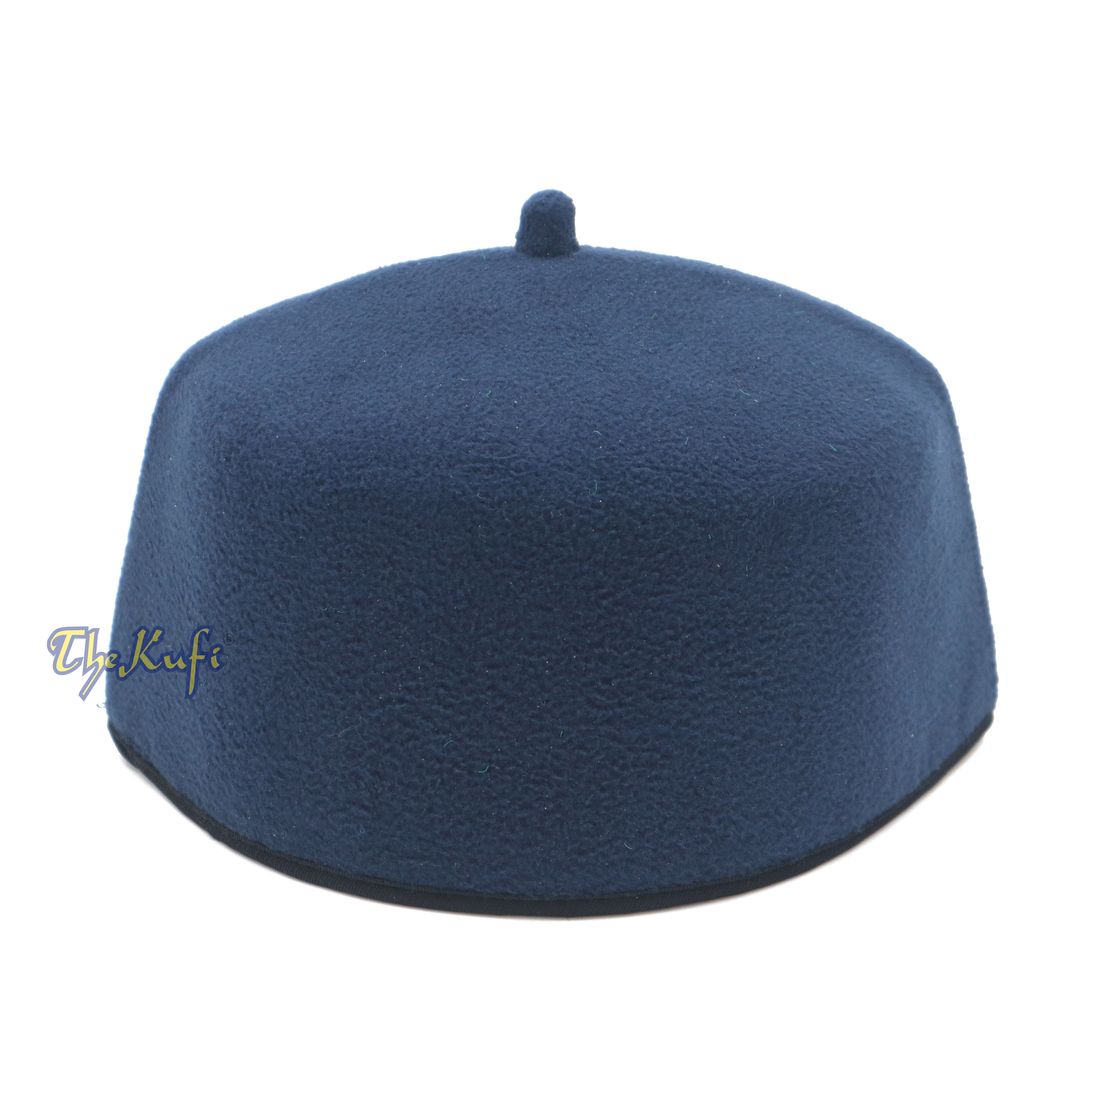 Dark Blue Fez-style Kufi with Tip